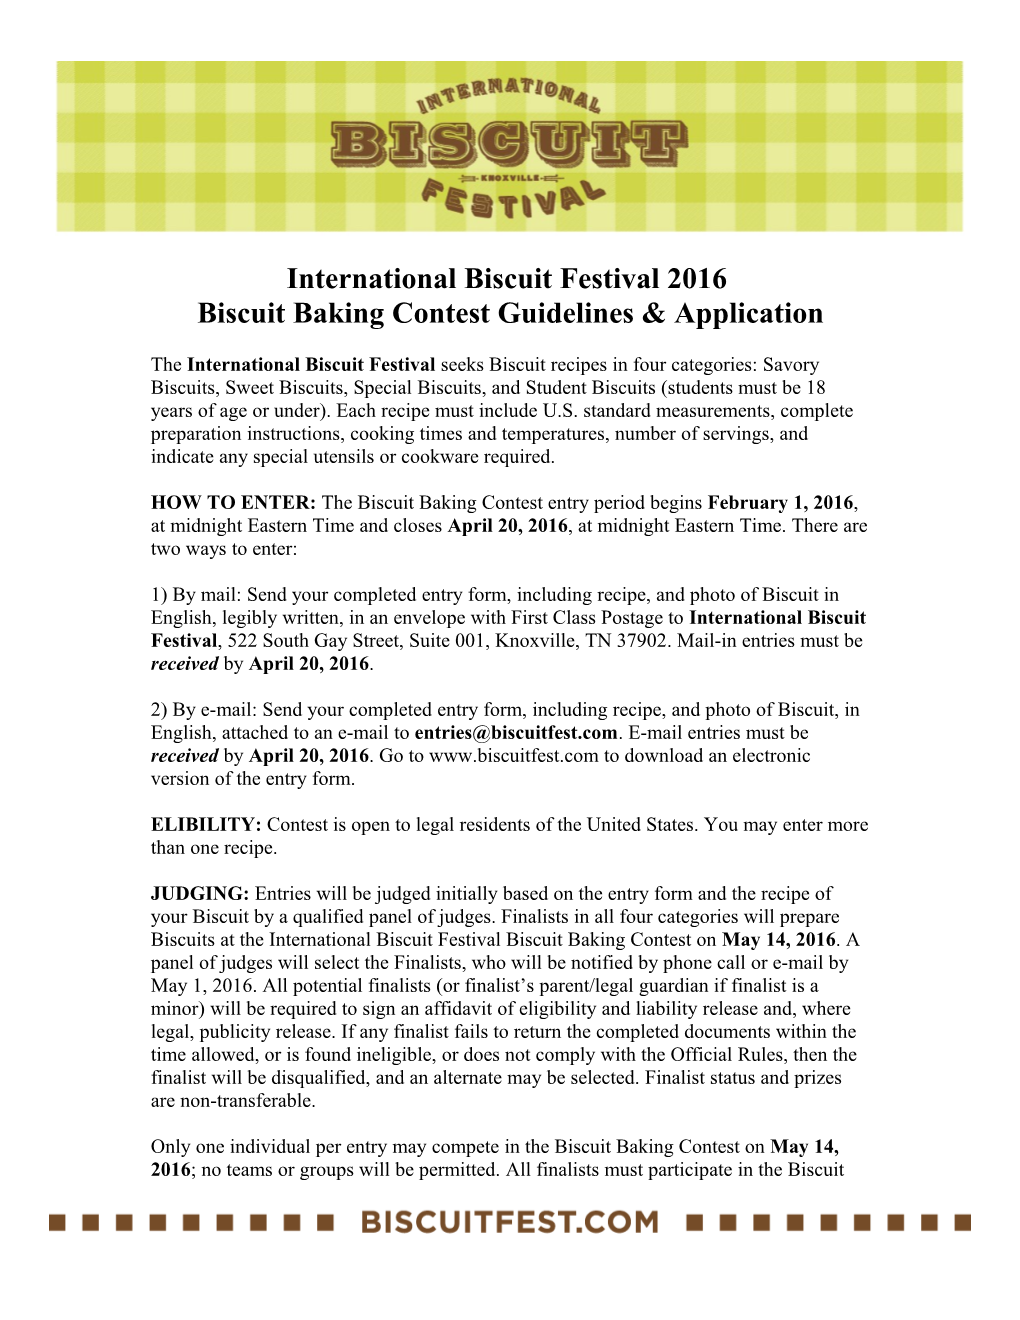 Biscuit Baking Contest Guidelines & Application